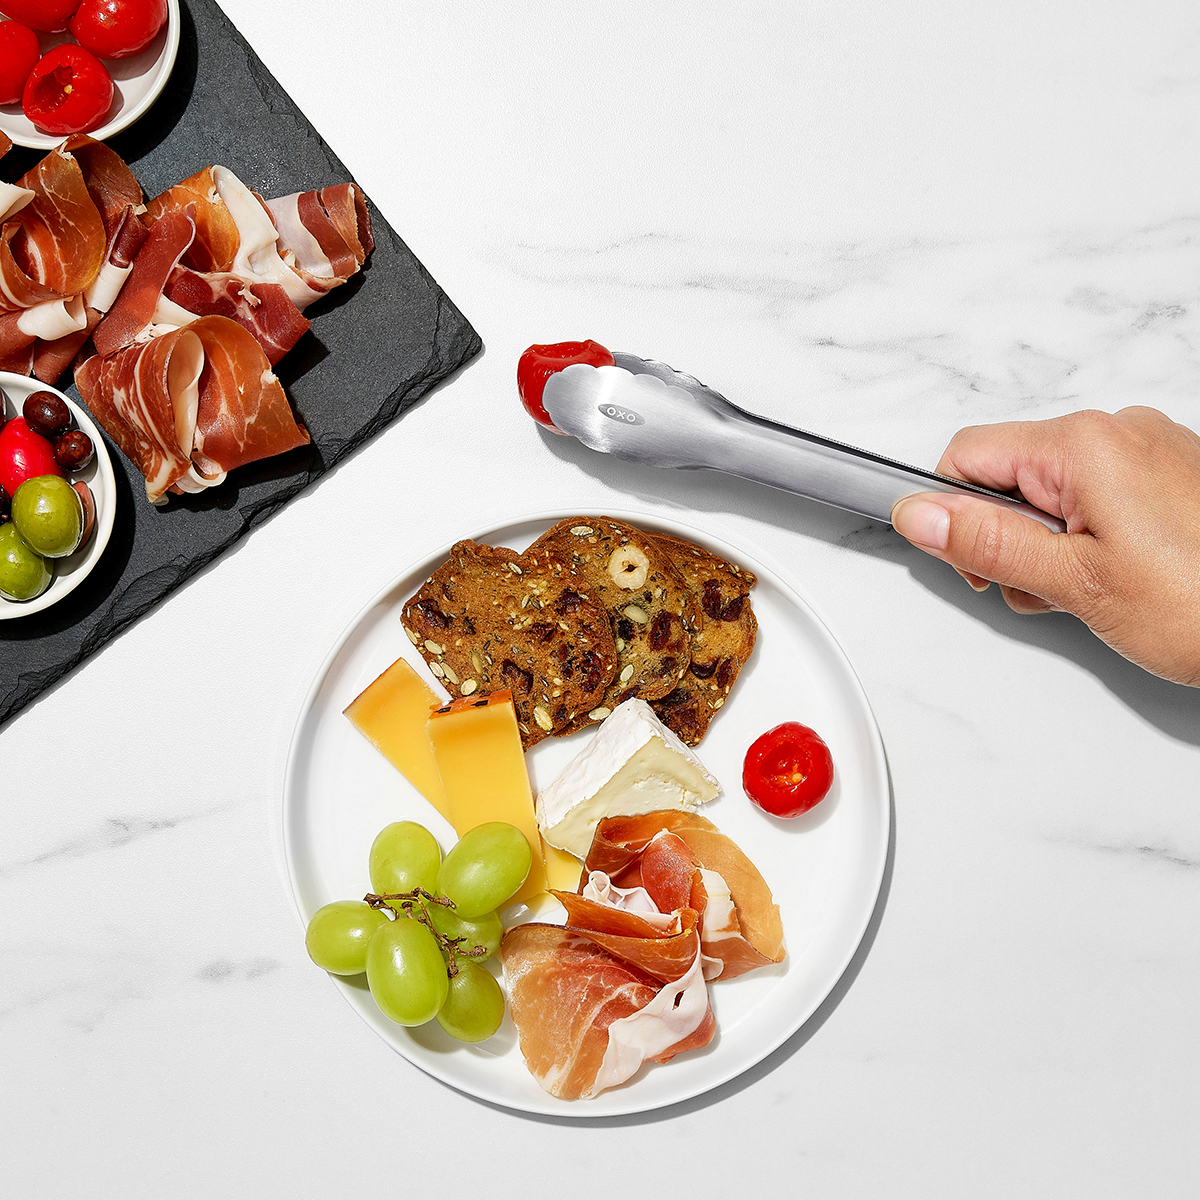 https://www.containerstore.com/catalogimages/394619/10082368-OXO-Mini-Tongs-VEN7.jpg